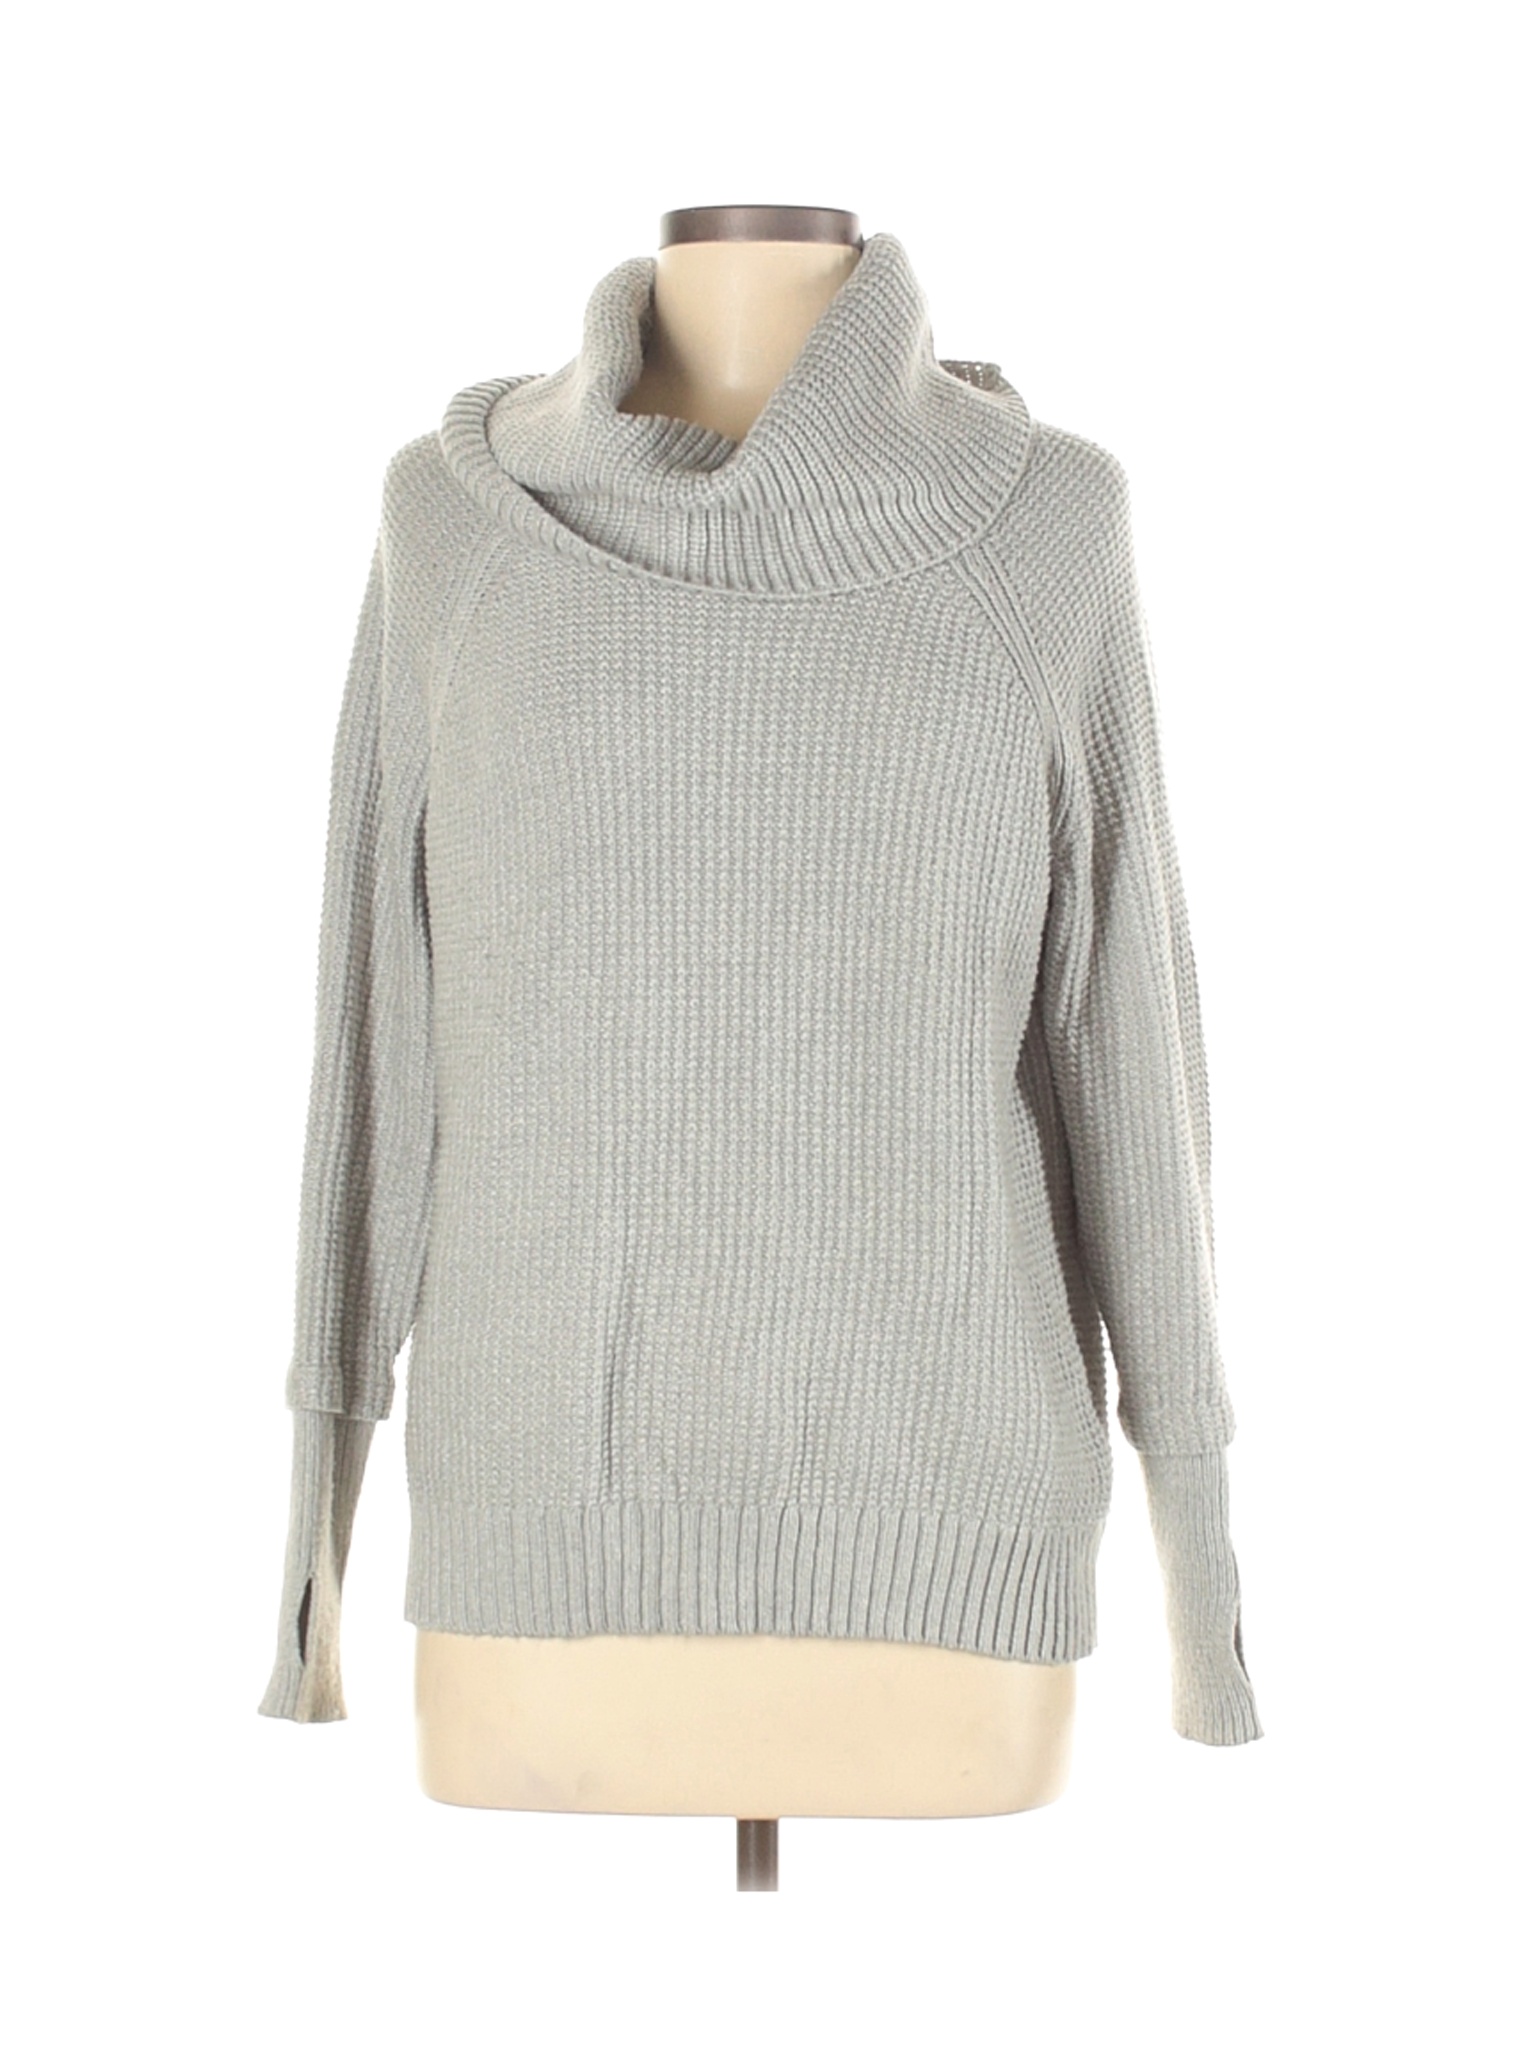 Market and Spruce Women Gray Pullover Sweater M | eBay